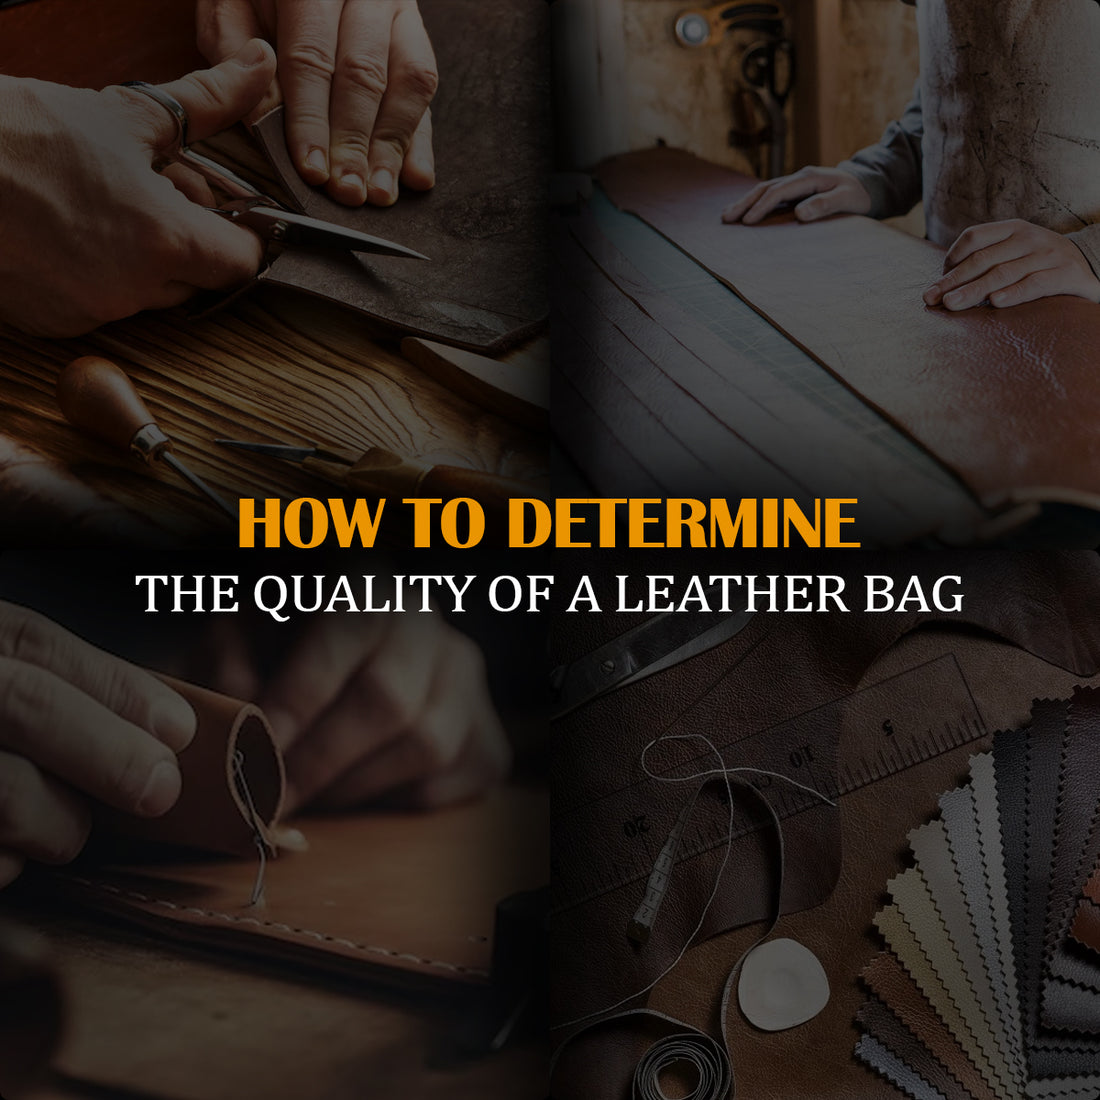 How to Determine the Quality of a Leather Bag